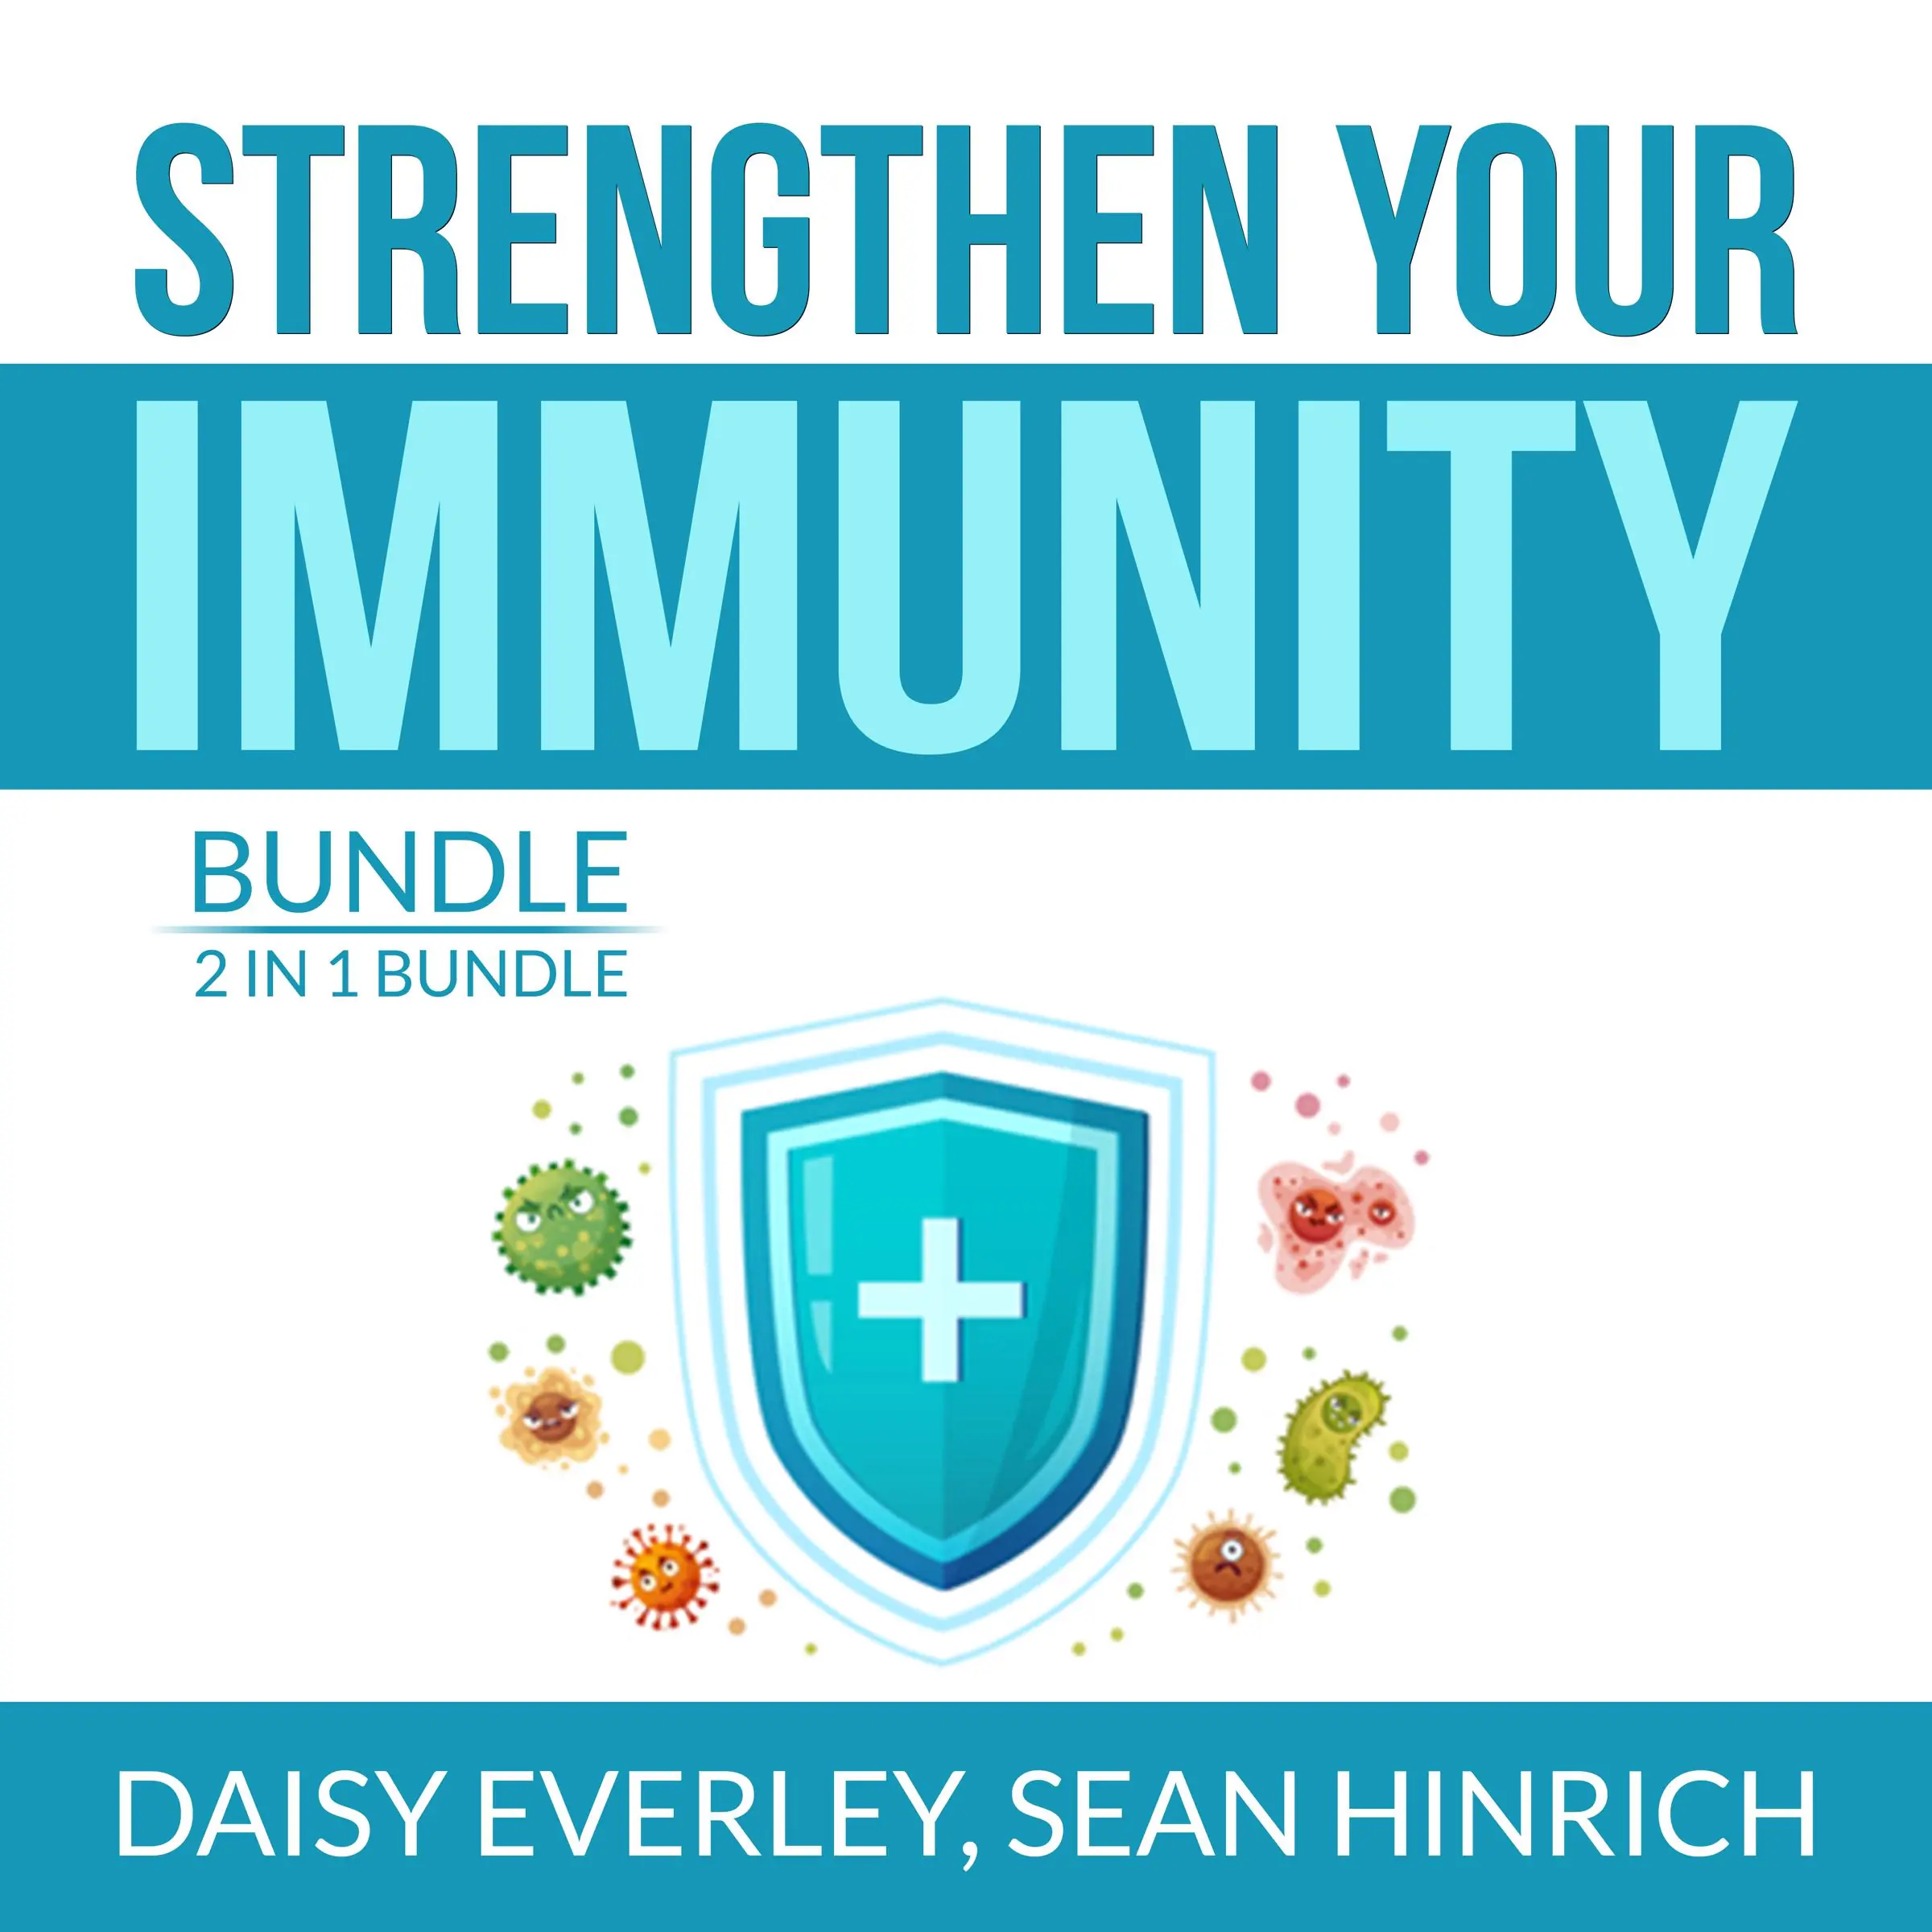 Strengthen Your Immunity Bundle: 2 in 1 Bundle, Super Immunity, The Autoimmune Solution Audiobook by and Sean Hinrich